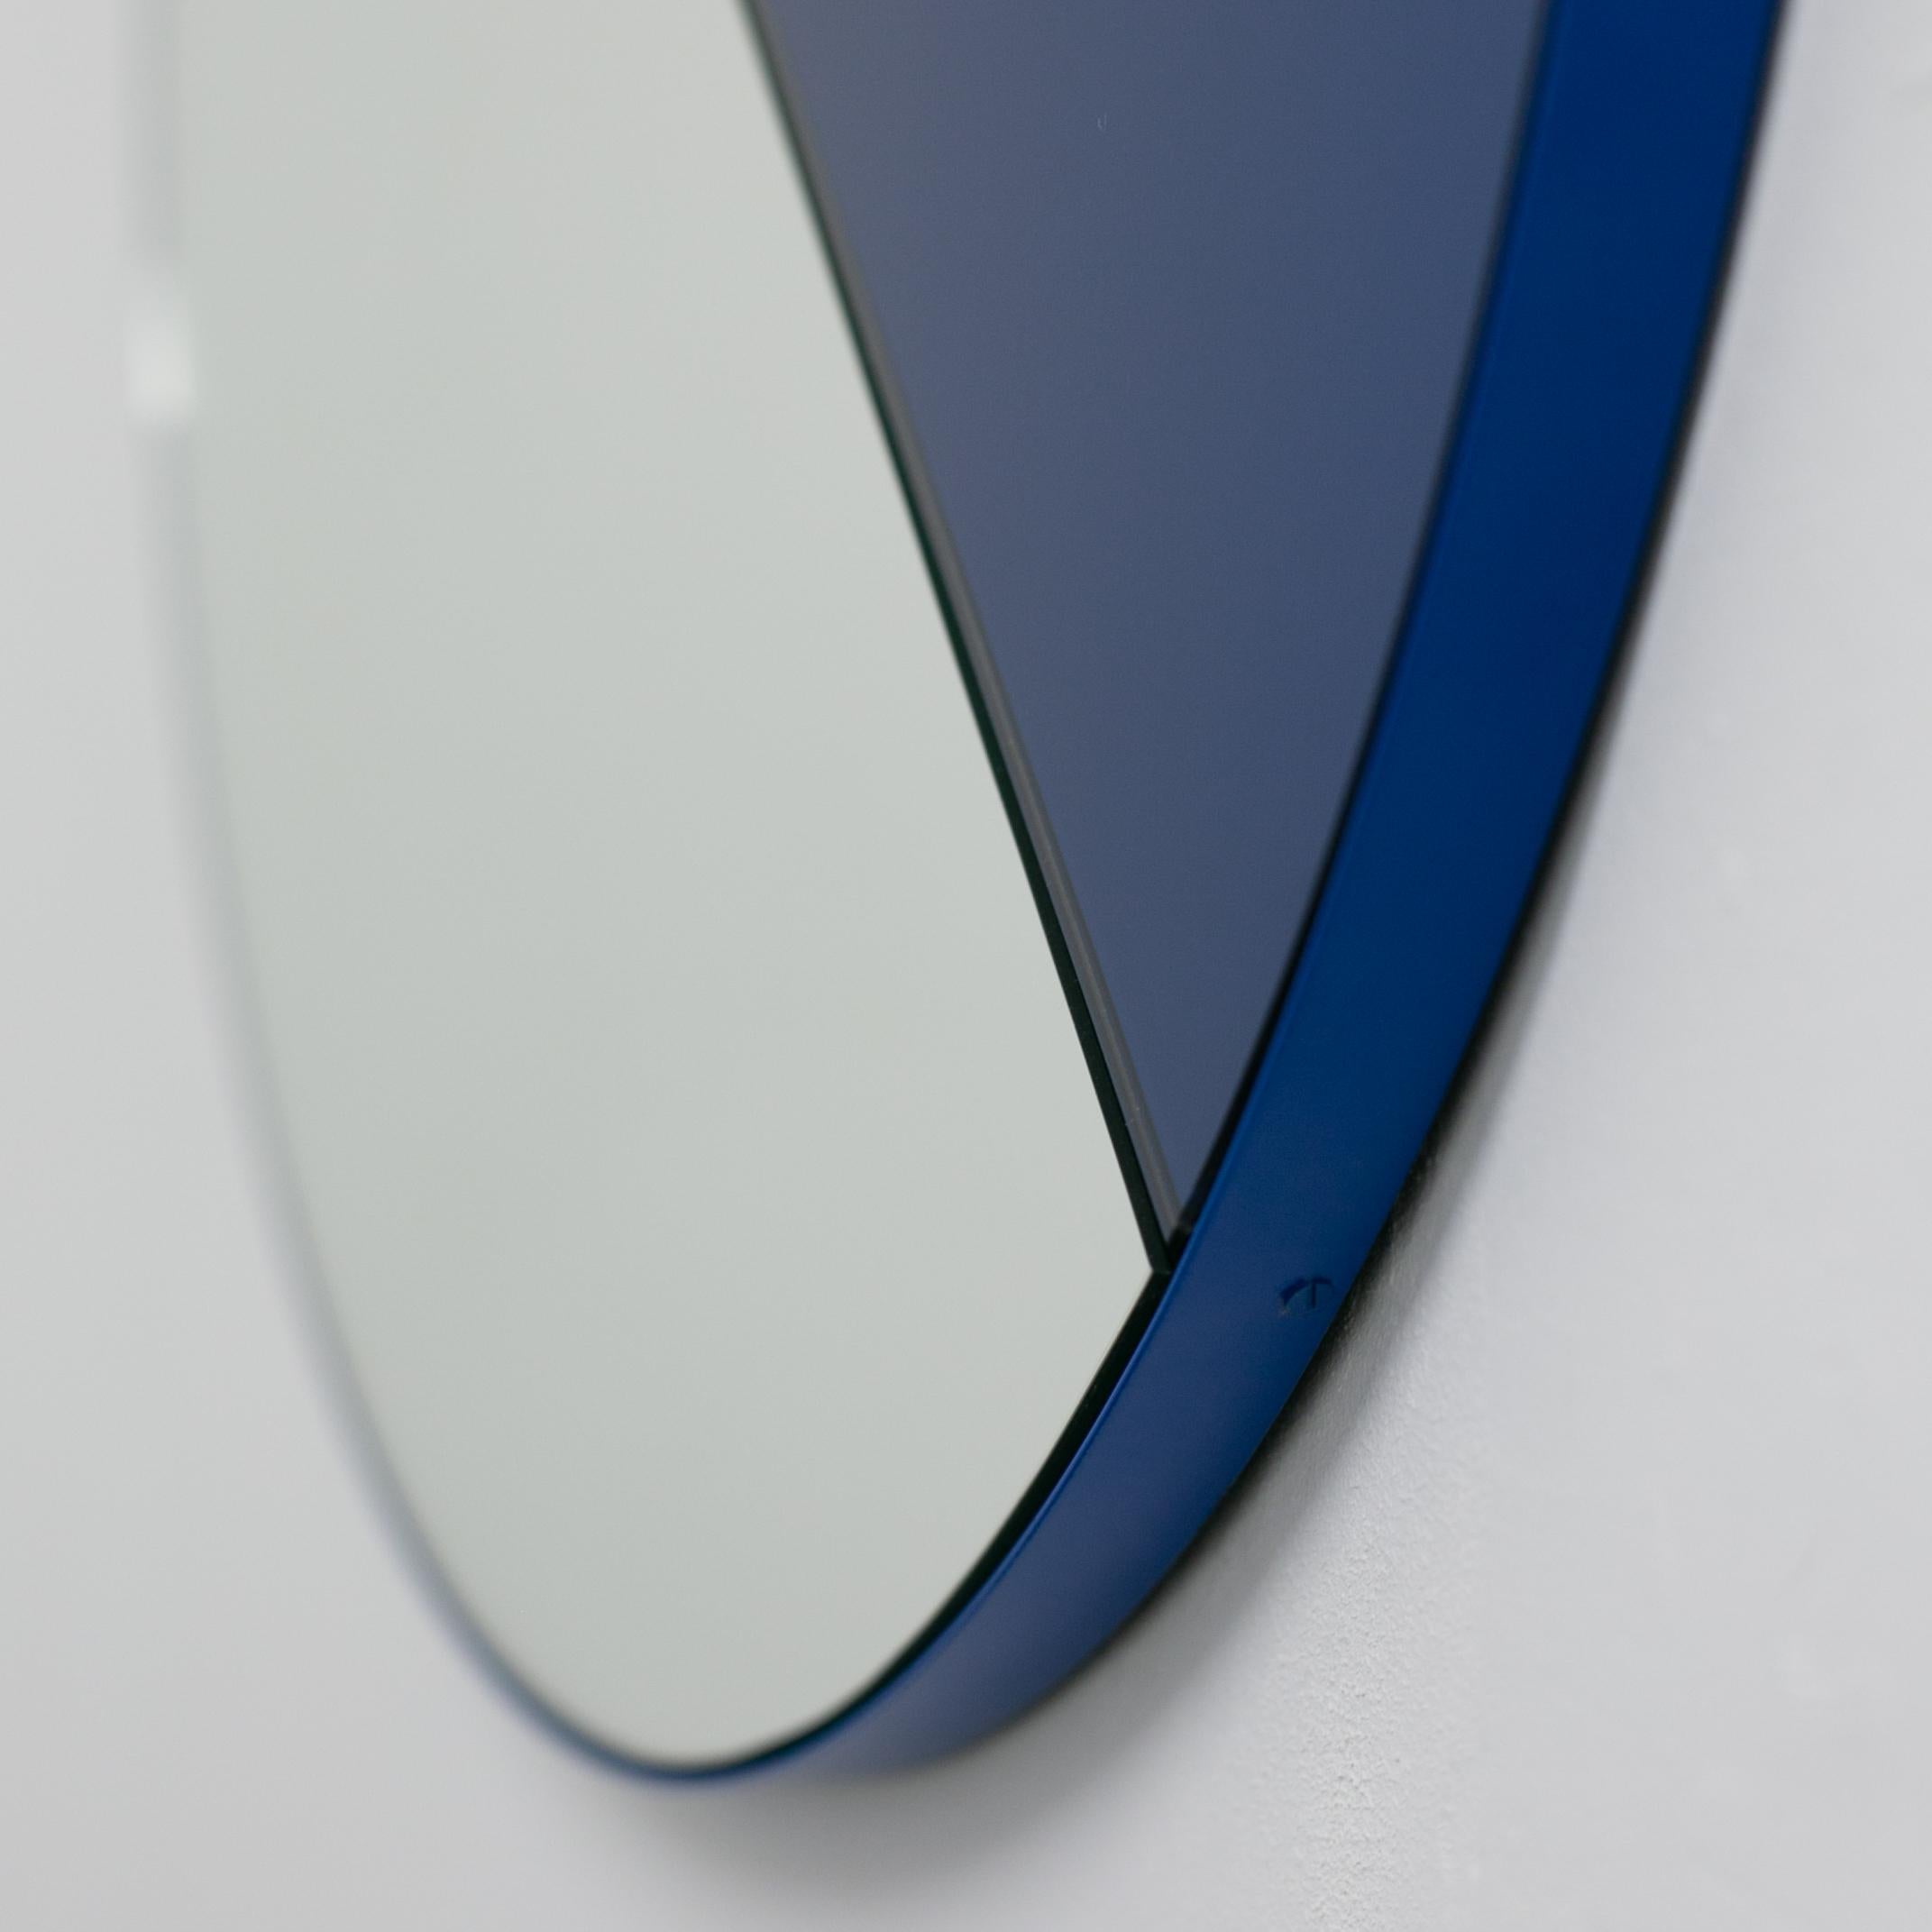 Powder-Coated Orbis Dualis Mixed Blue Tinted Contemporary Round Mirror with Blue Frame, Small For Sale